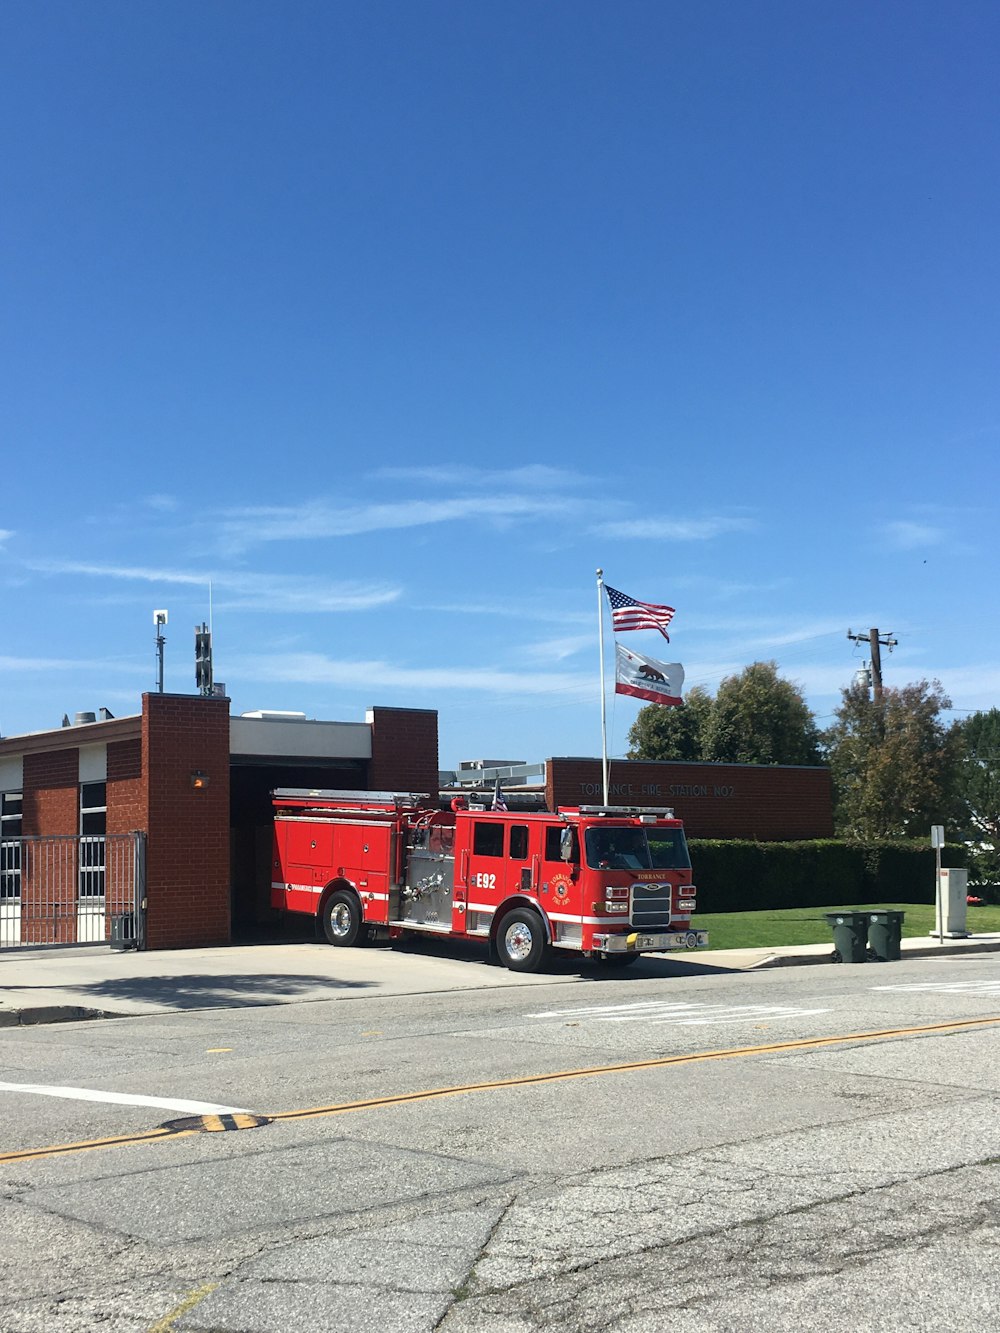 a fire truck parked in front of a building with flags